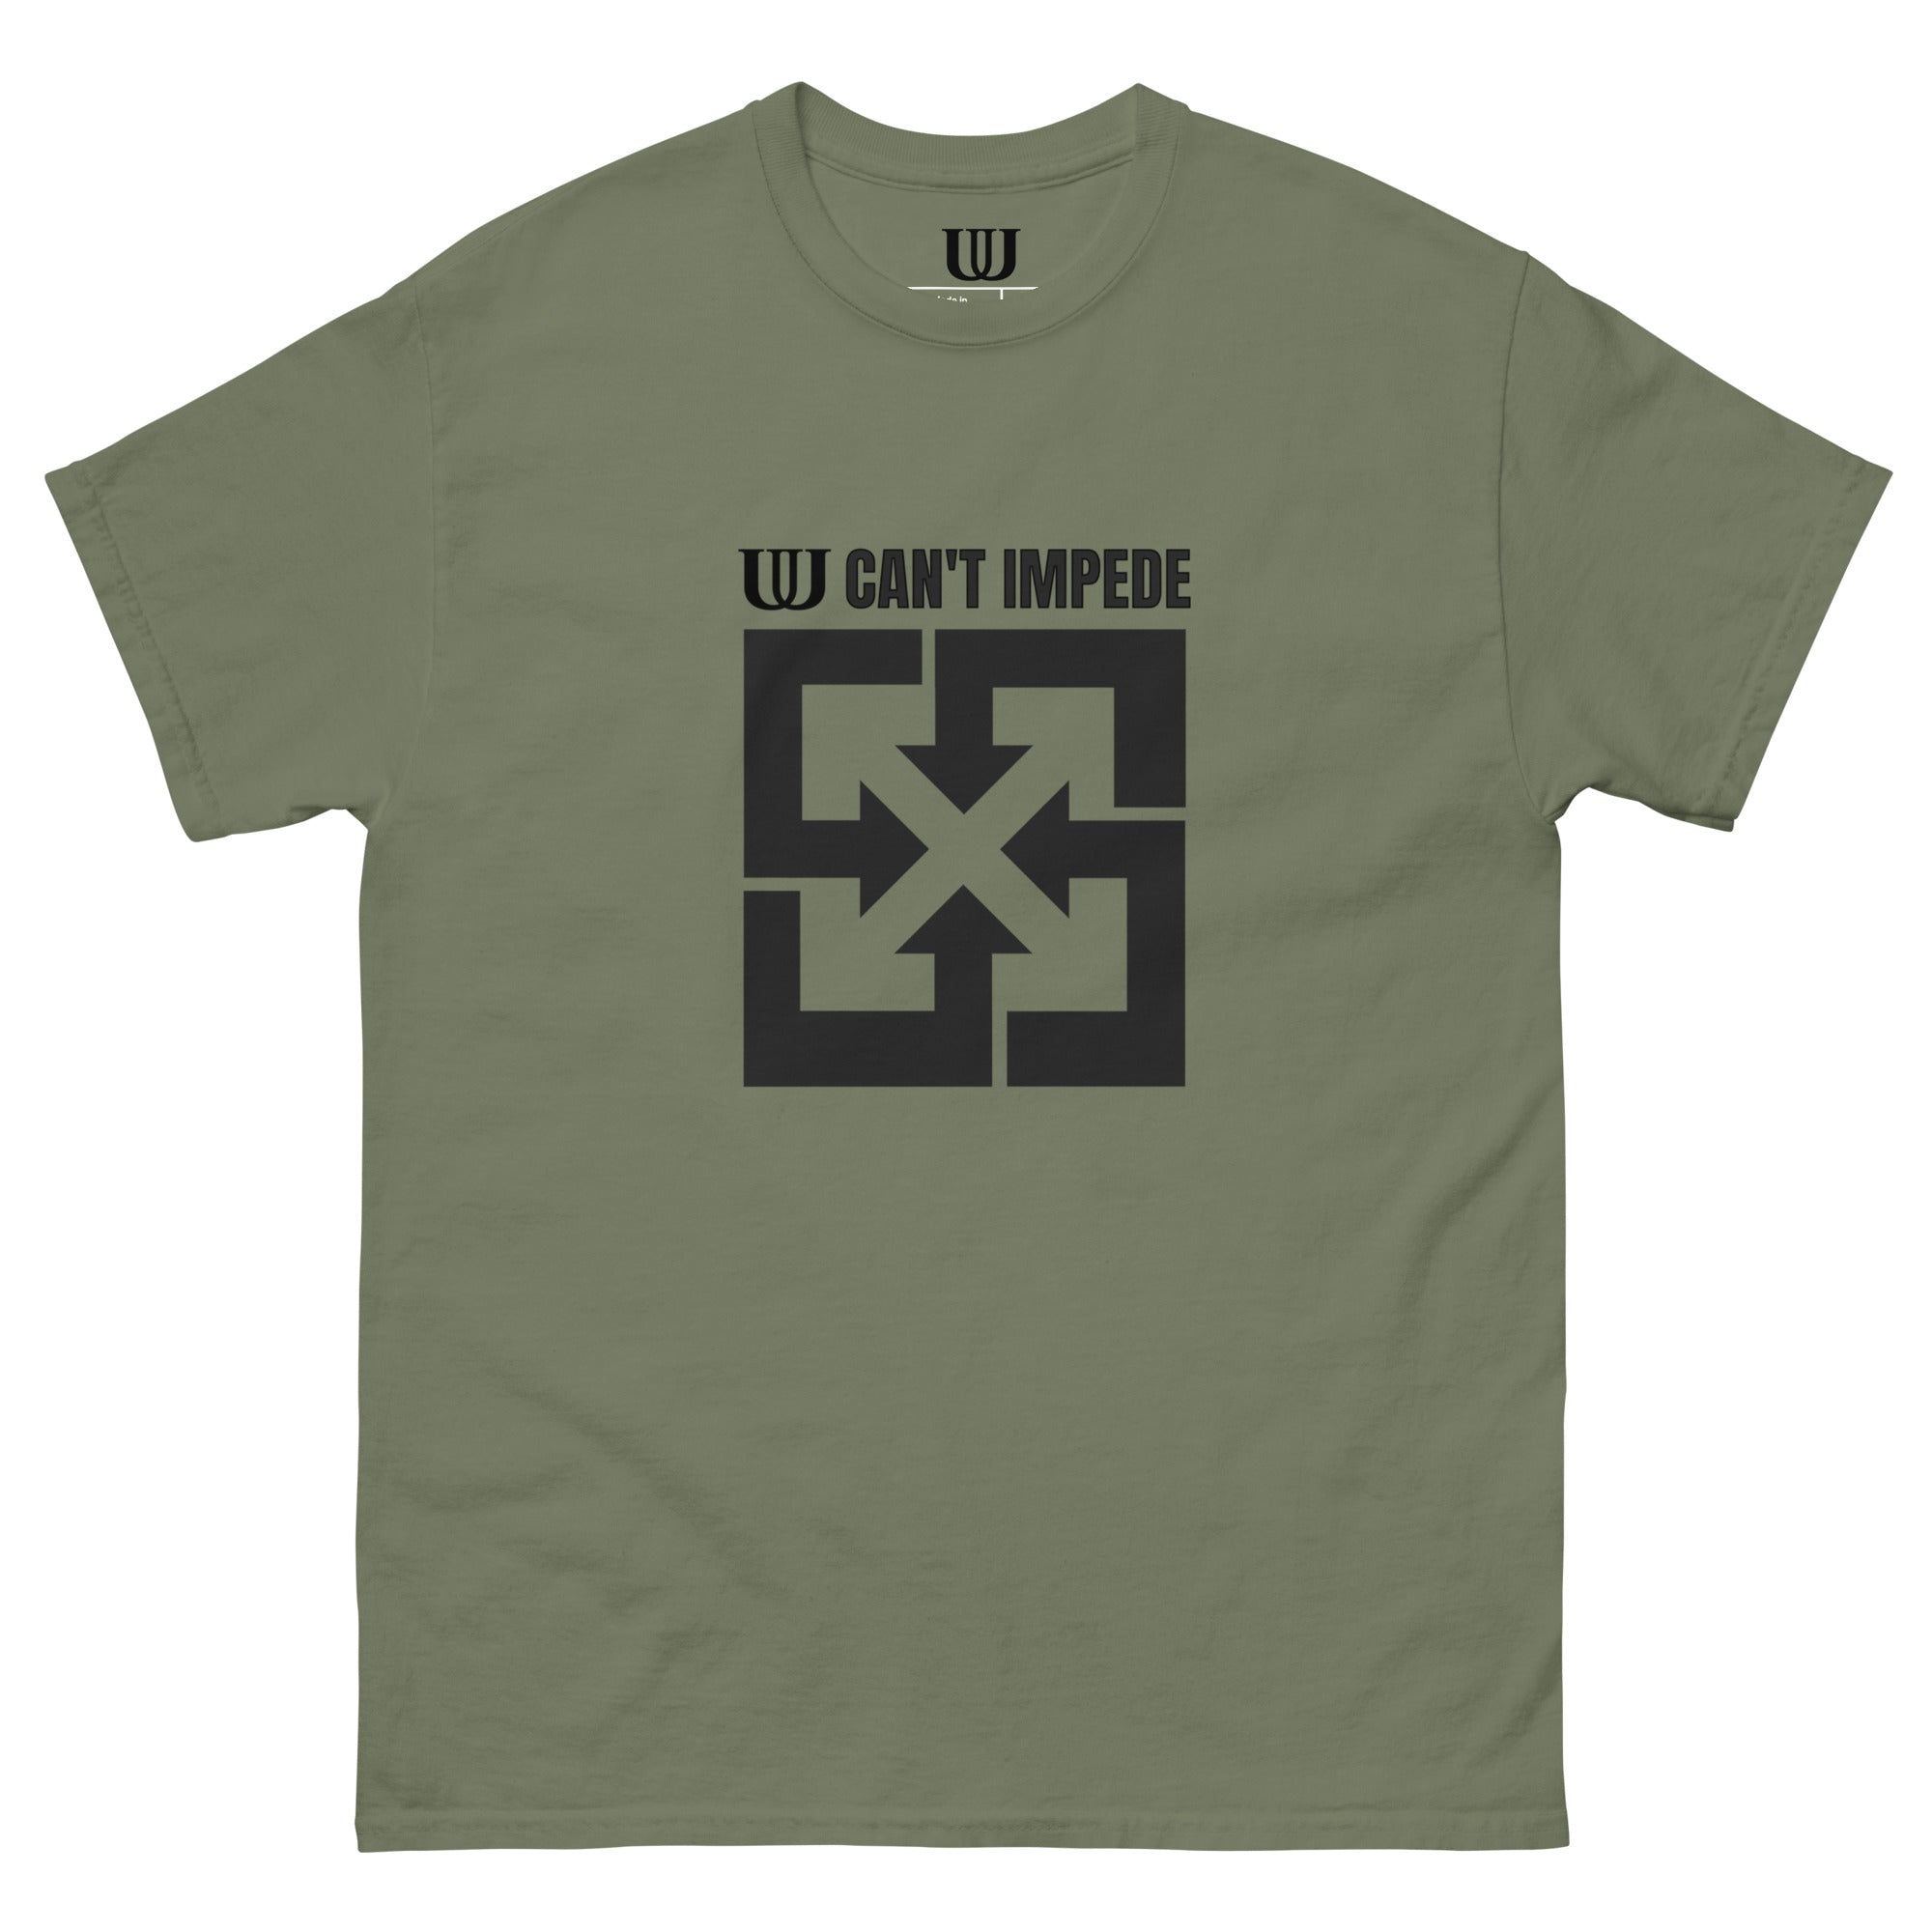 UU CAN'T IMPEDE T-SHIRT